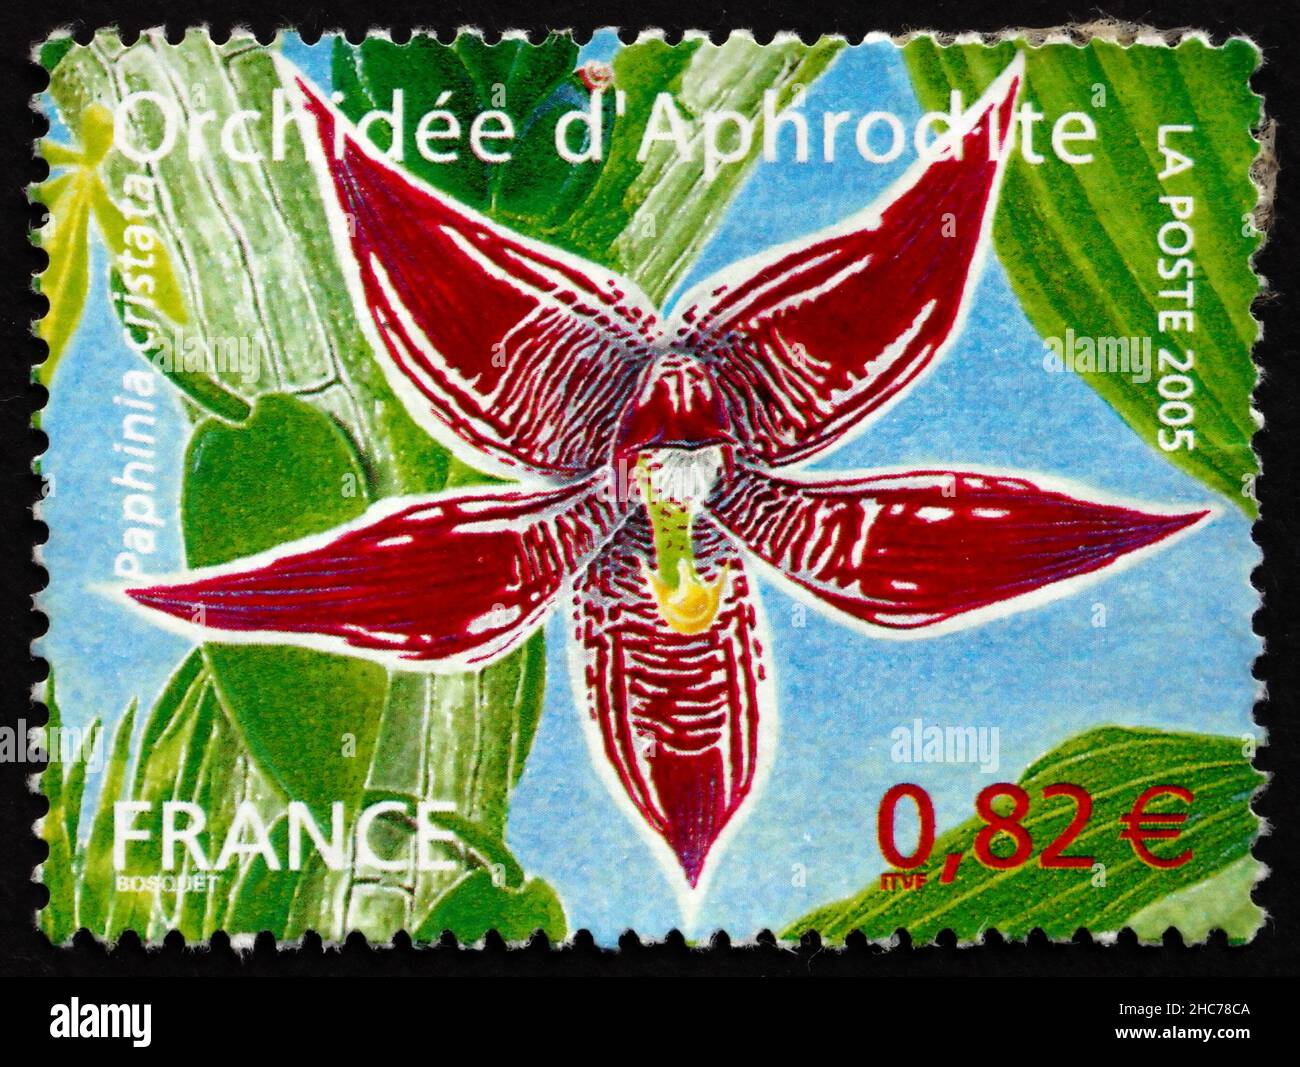 FRANCE - CIRCA 2005: a stamp printed in the France shows Paphinia Cristata, Orchid Endemic to Northern South America, circa 2005 Stock Photo